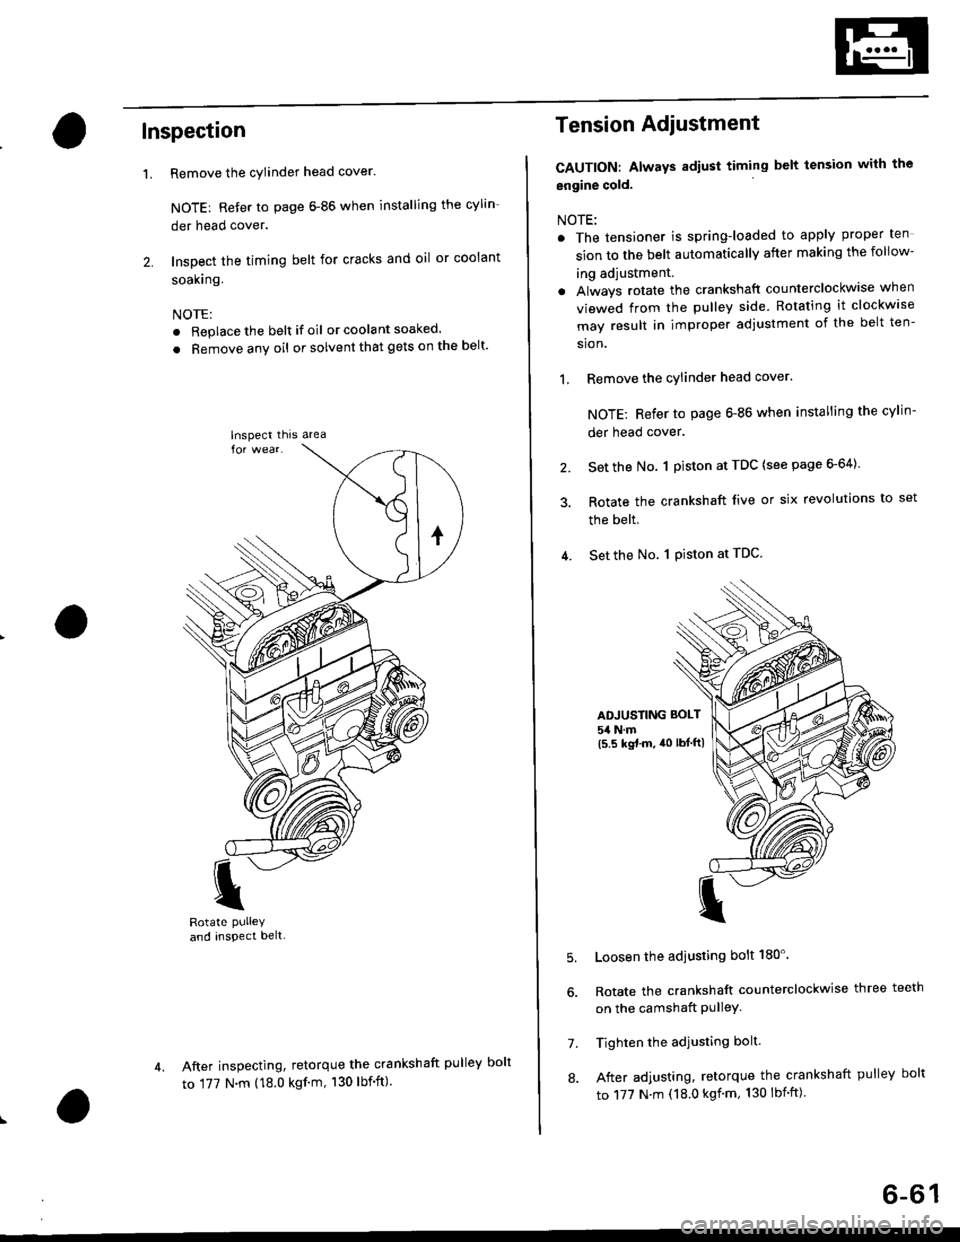 HONDA CIVIC 1999 6.G Owners Manual Inspection
Remove the cylinder head cover.
NOTE: Refer to page 6-86 when installing the cylin-
der head cover.
Inspect the timing belt for cracks and oil or coolant
soakrng.
NOTE:
. Replace the belt i